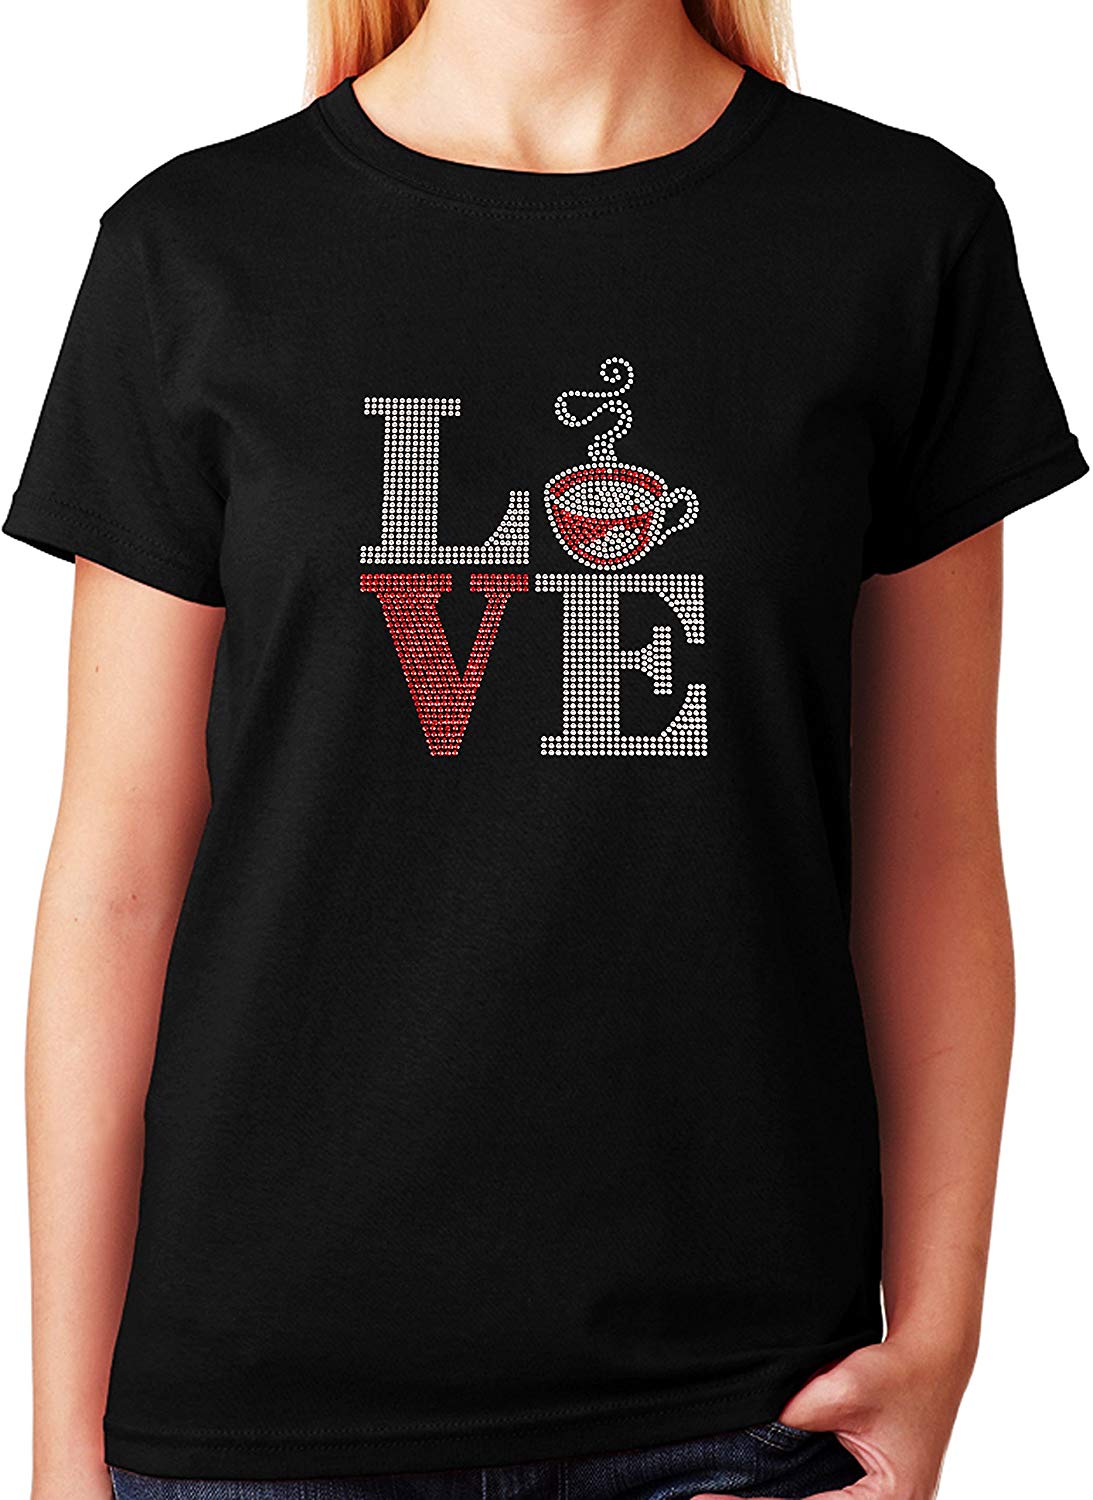 Women's / Unisex T-Shirt with Love Coffee in Spangles